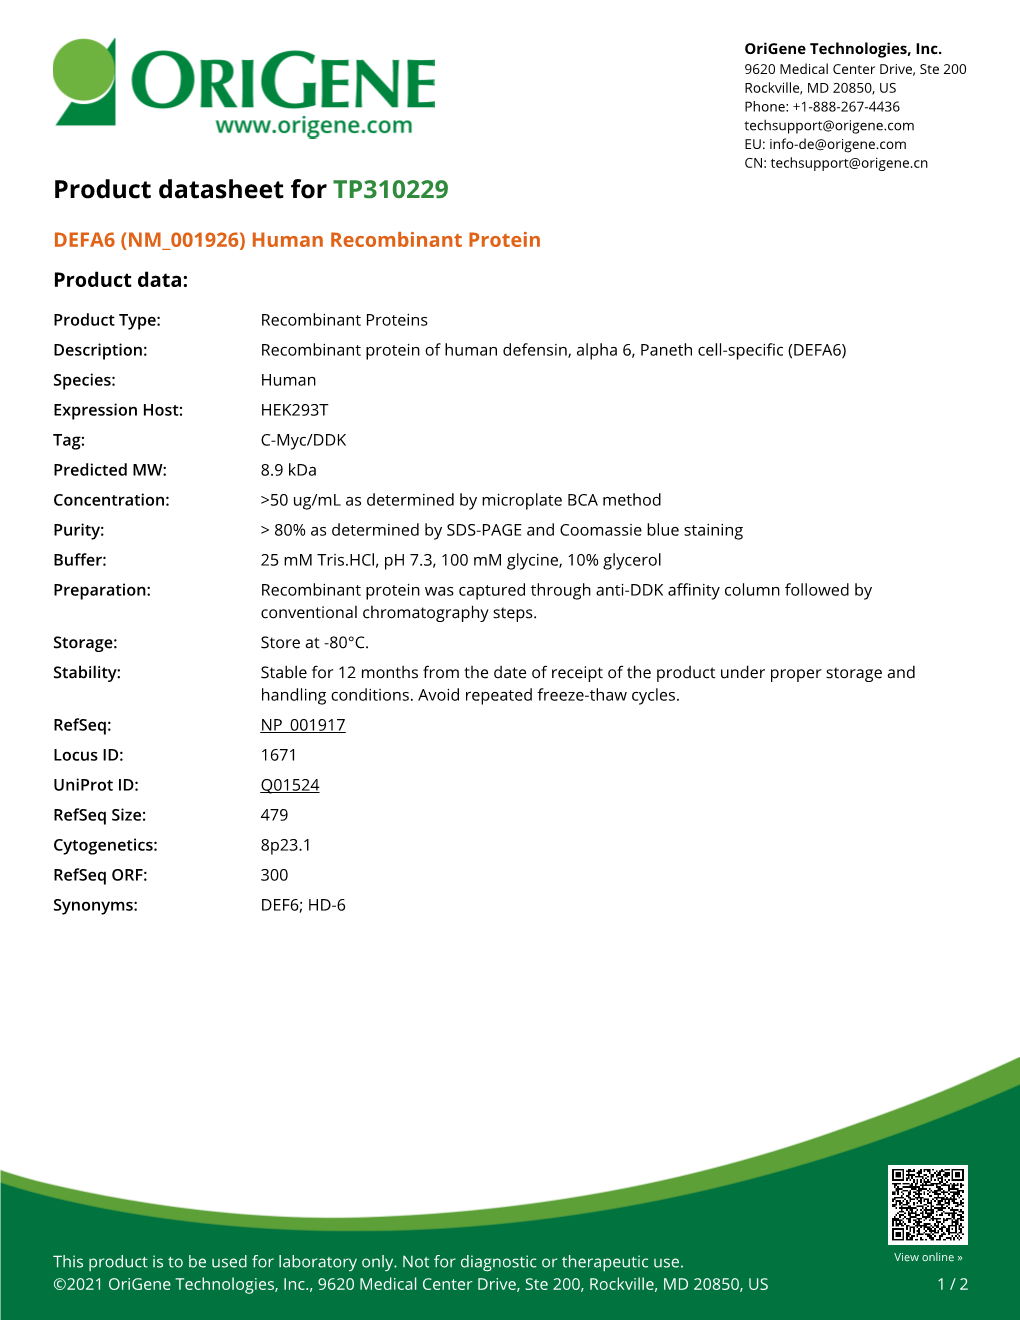 DEFA6 (NM 001926) Human Recombinant Protein Product Data